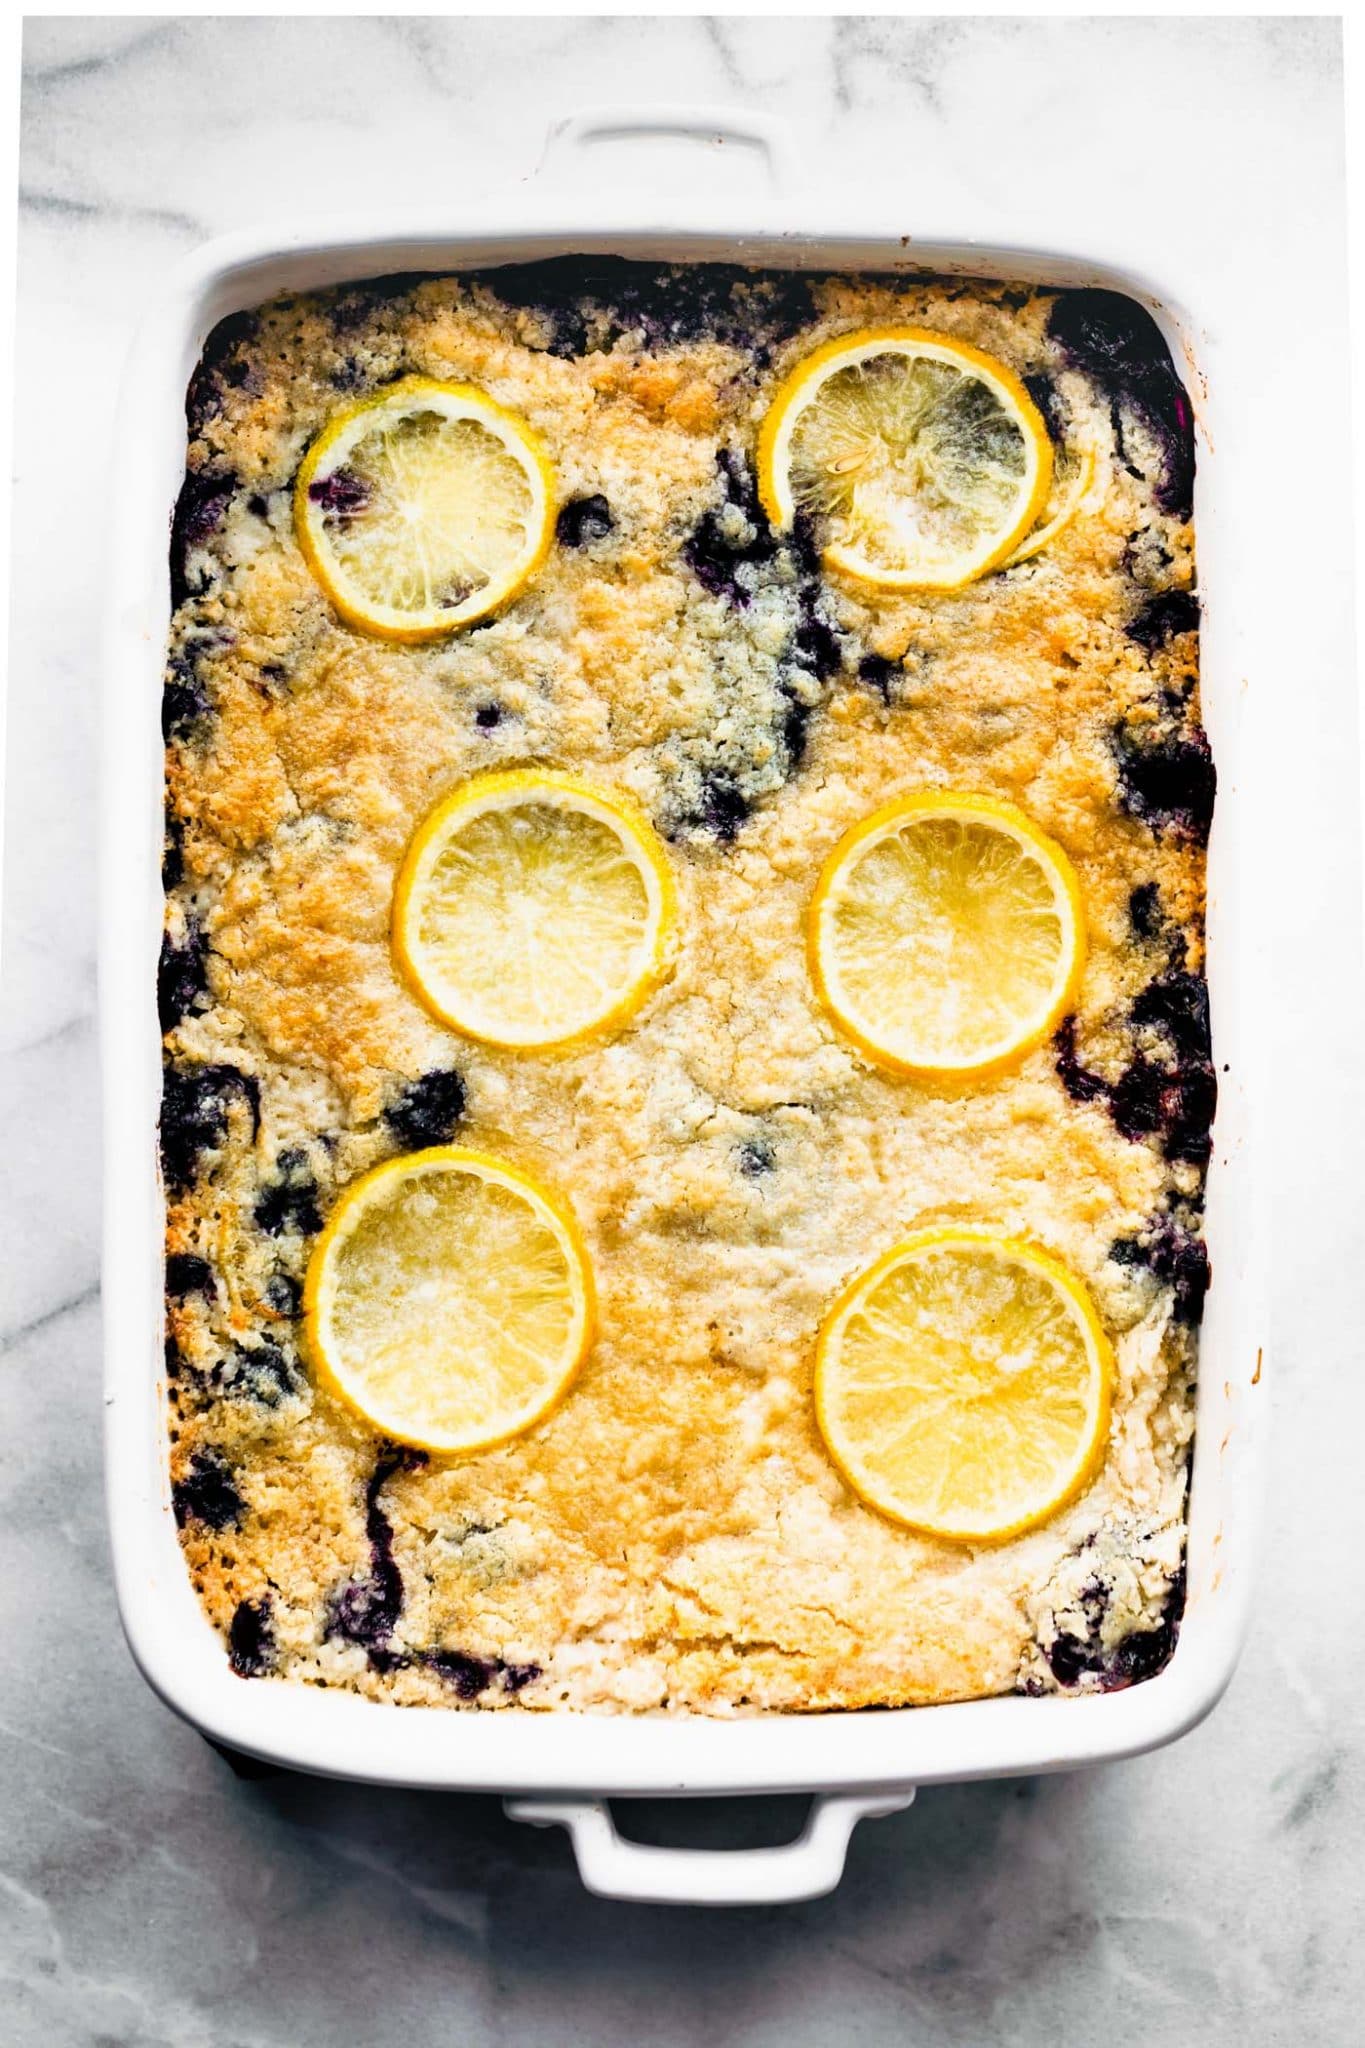 Overhead view lemon blueberry cake topped with baked-in lemon slices in white baking dish.